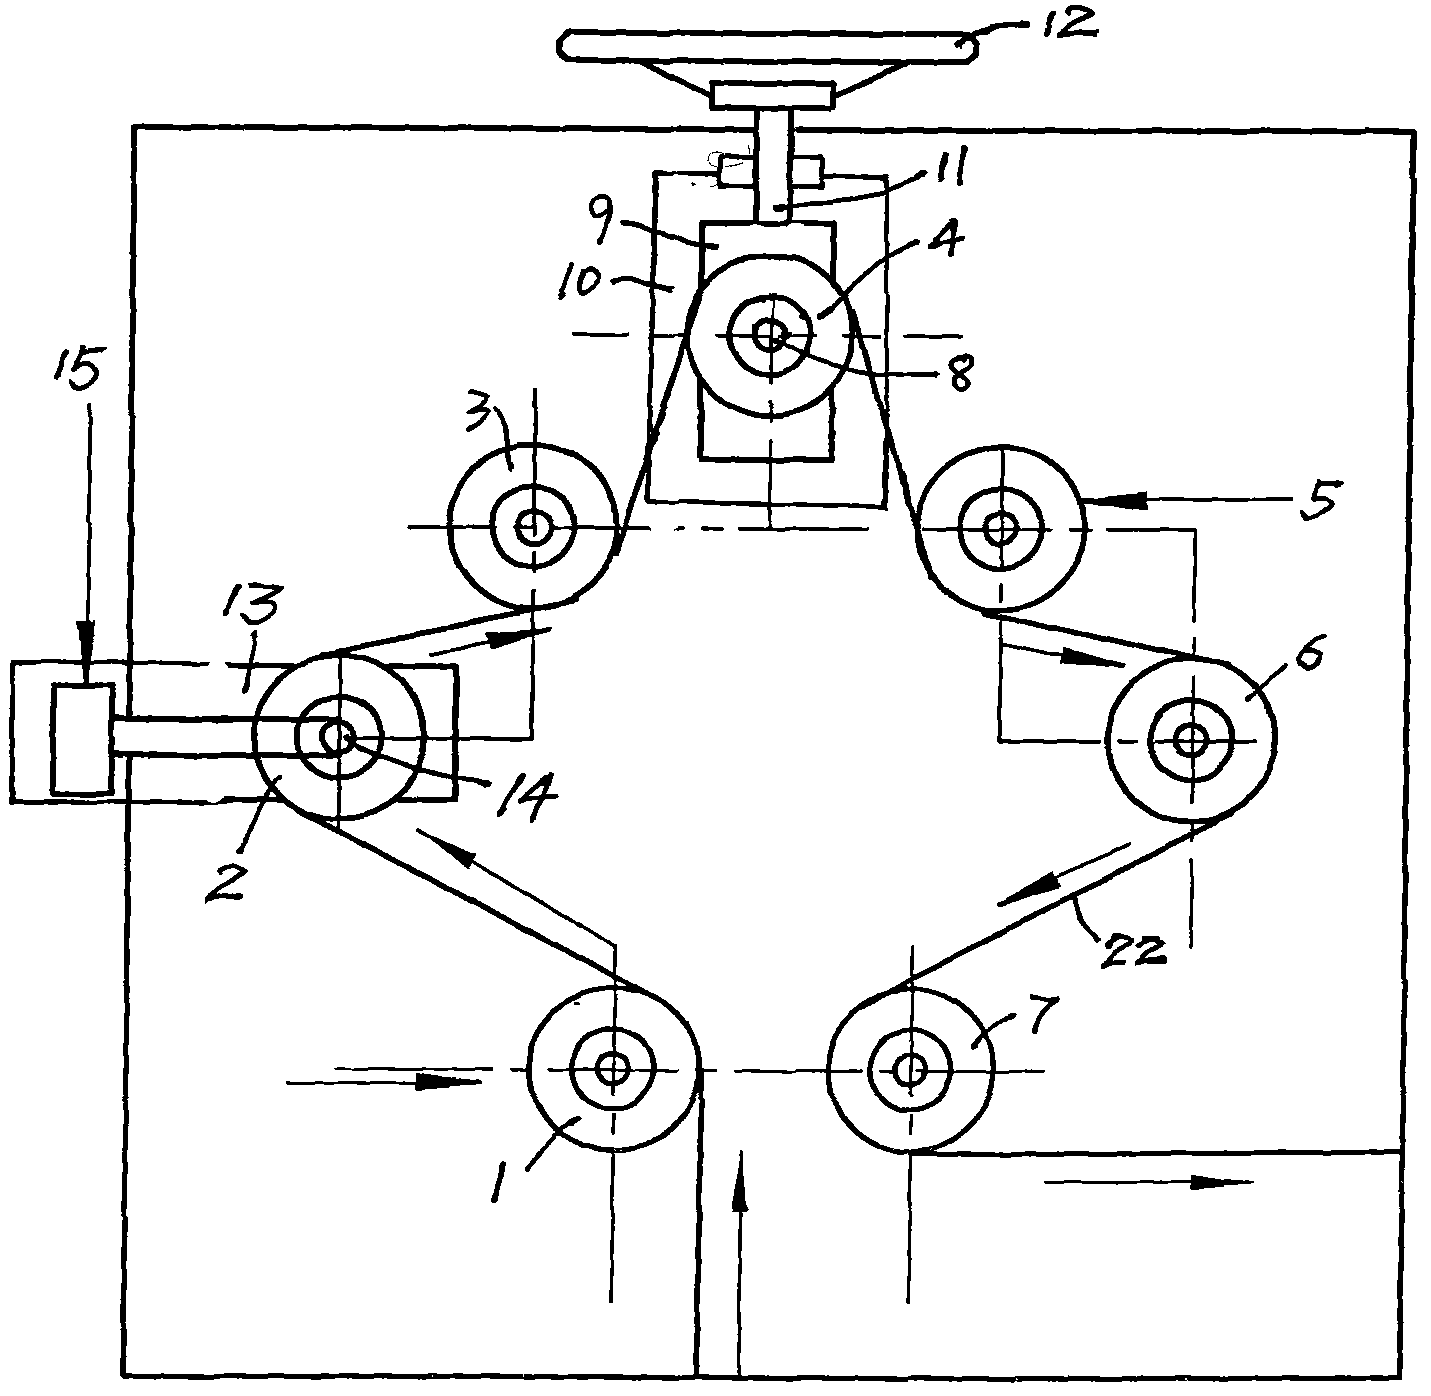 Movable pre-stretching device for chain